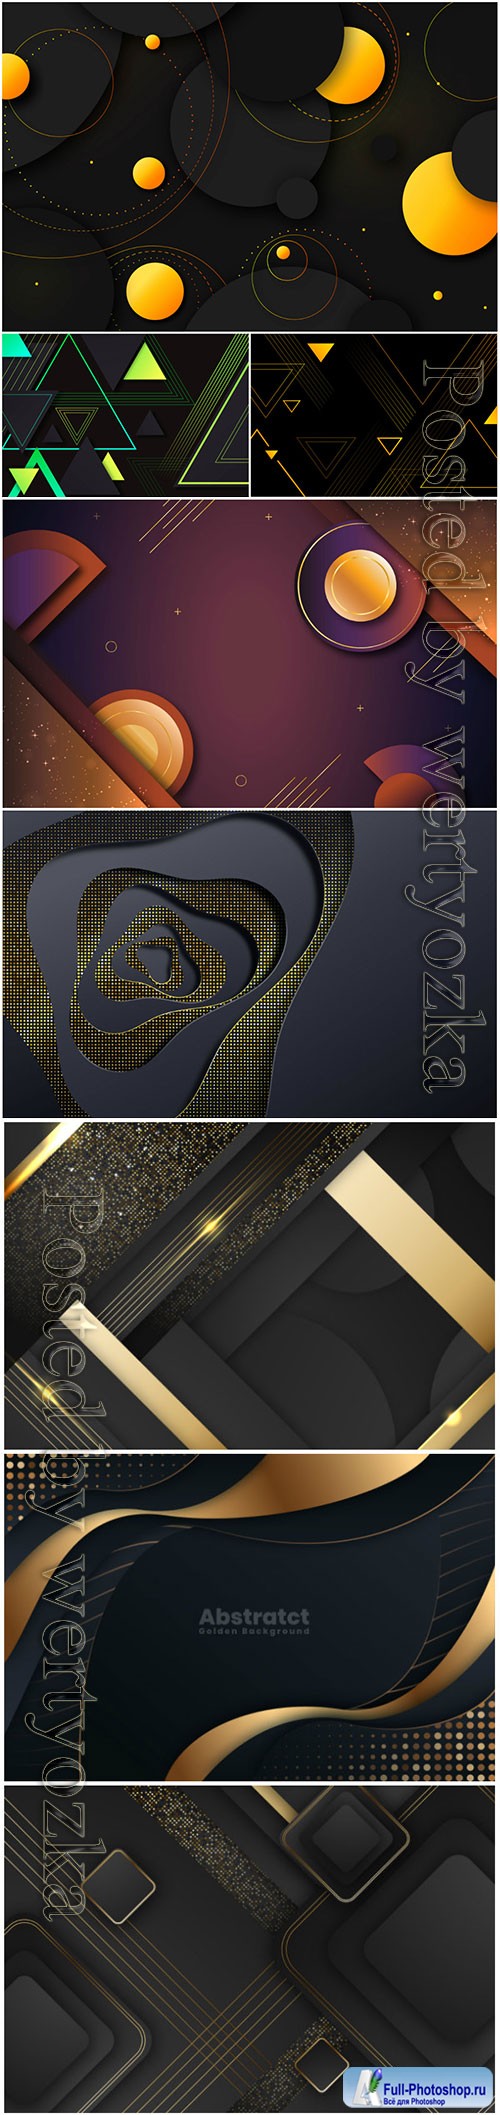 Luxury abstract backgrounds in vector # 7